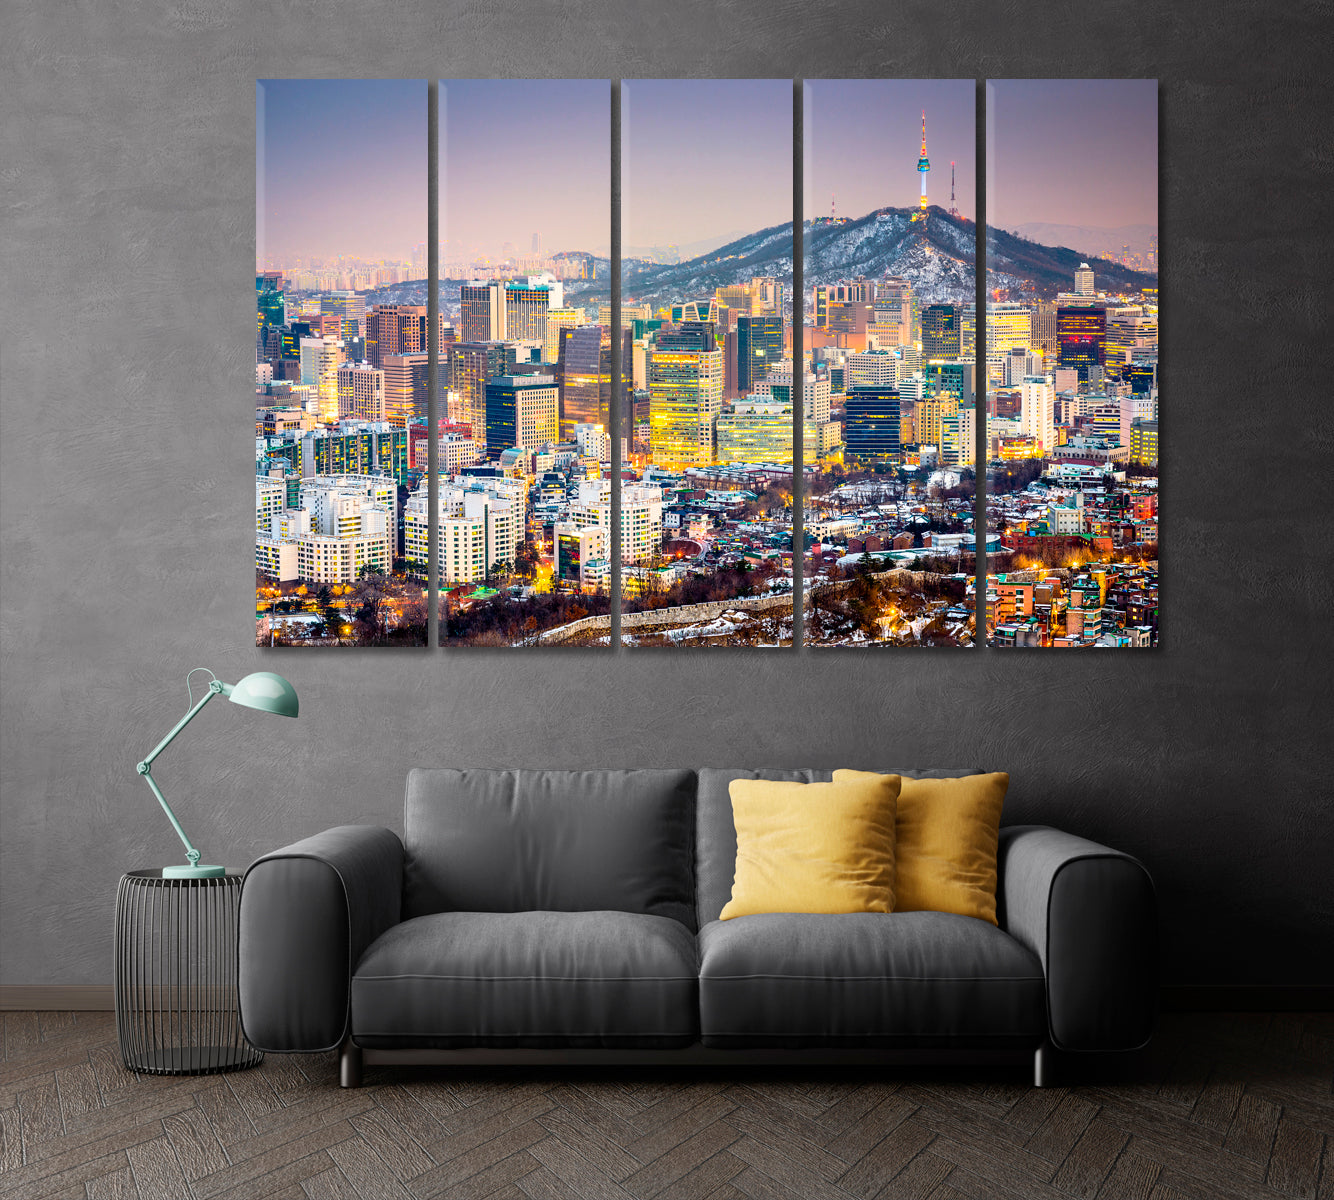 Seoul Downtown Cityscape Canvas Print ArtLexy 5 Panels 36"x24" inches 